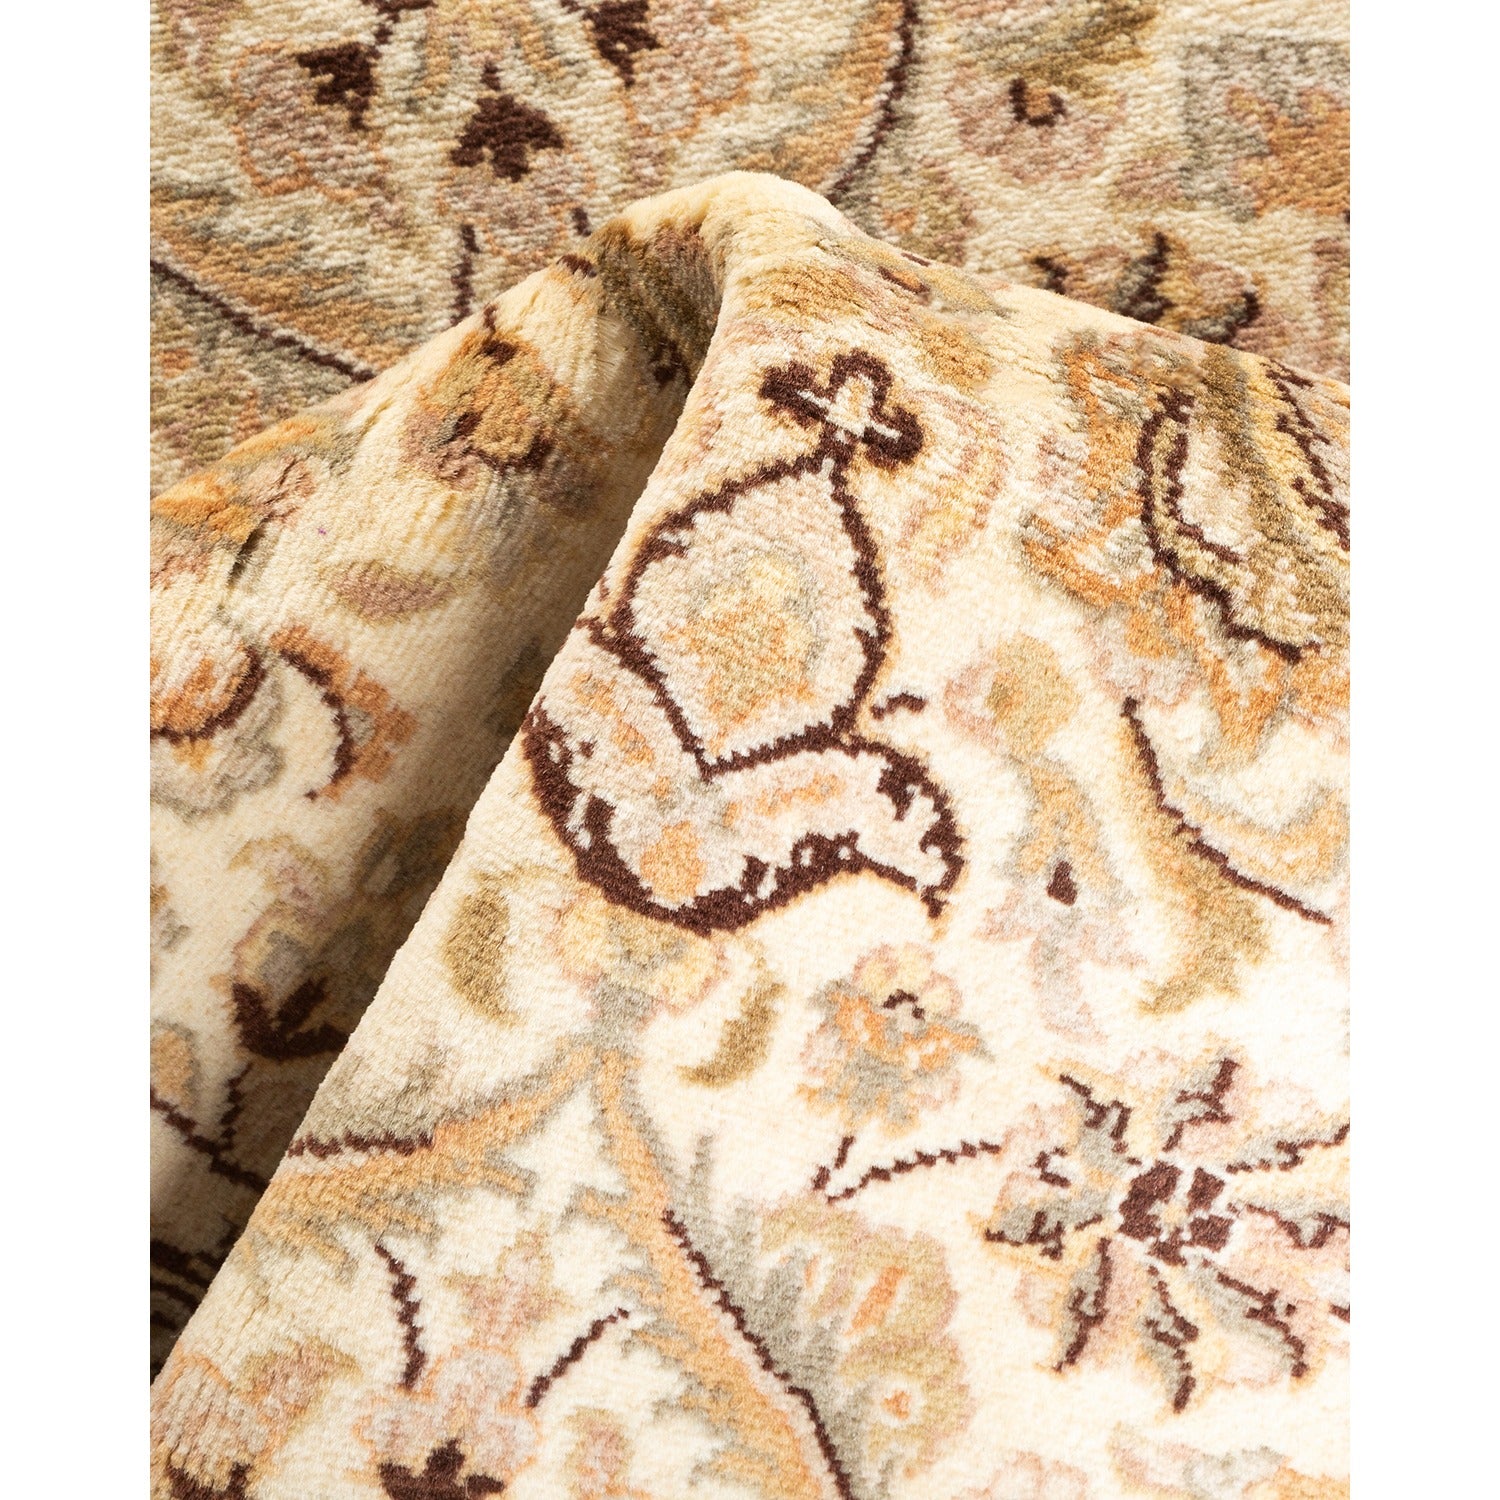 Soft-toned, plush rug with intricate floral pattern folded for display.